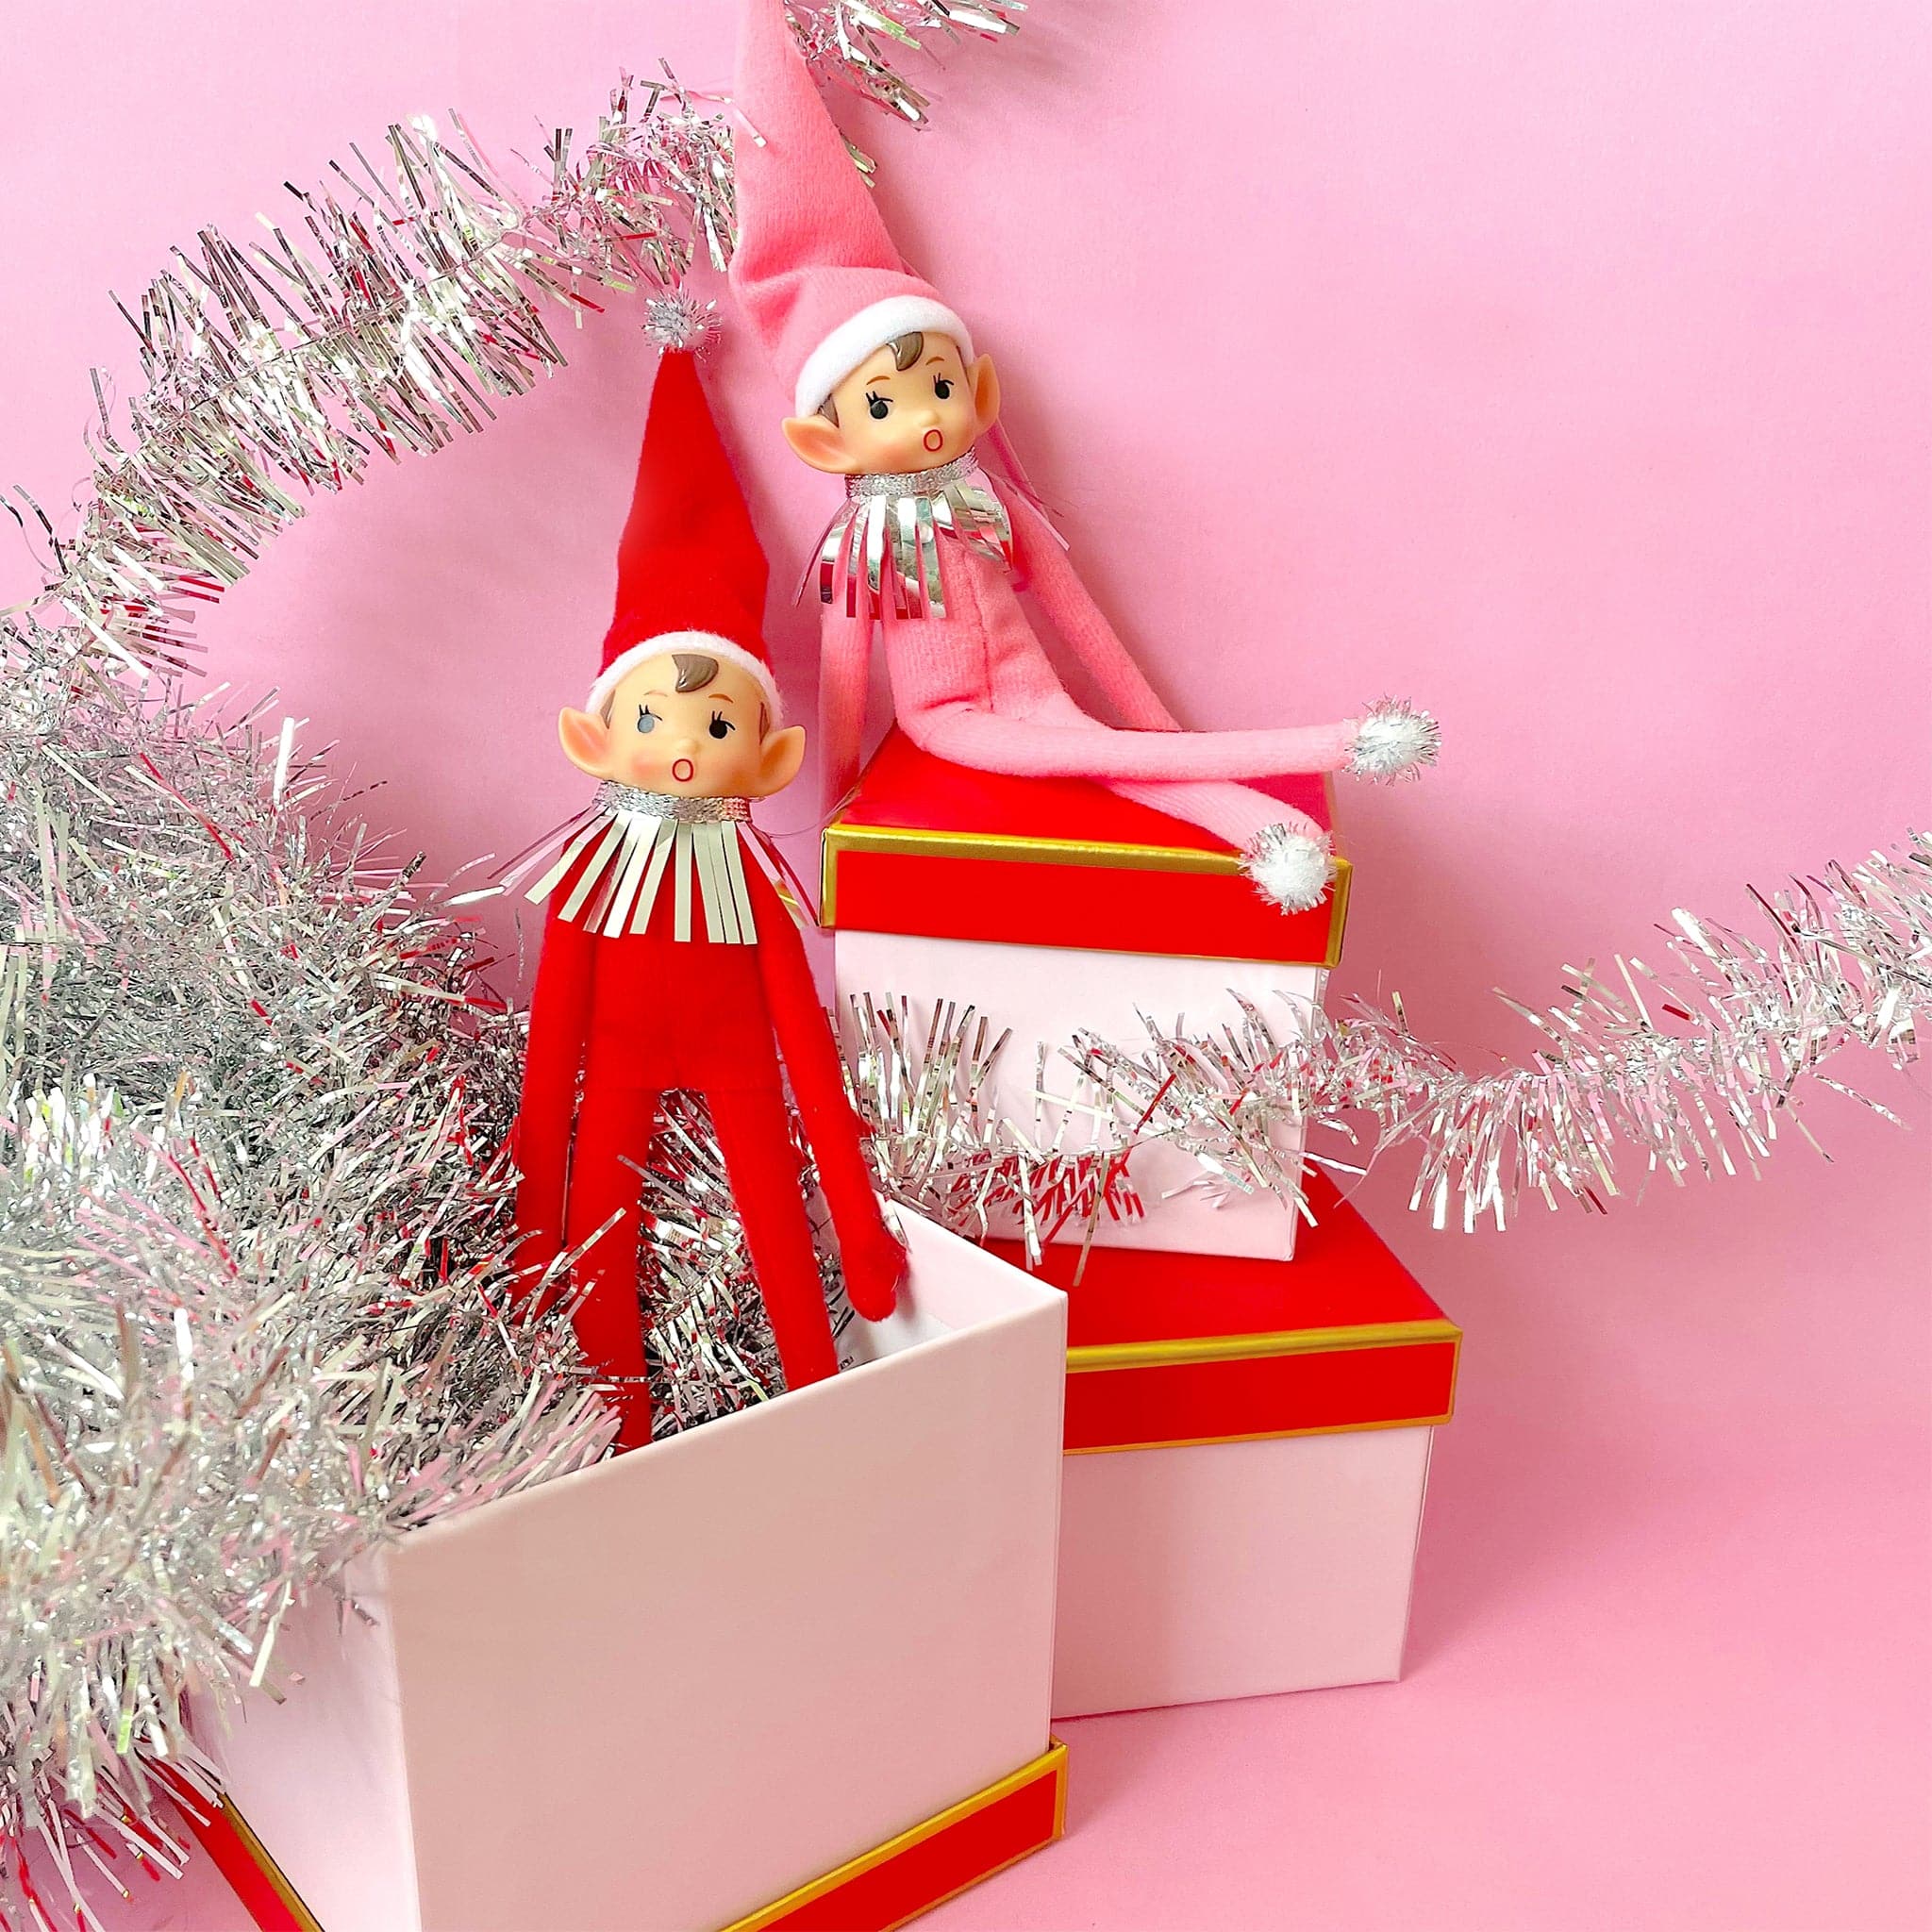 On a cream background is a elf ornament with long arms and legs with a pink suit and hat on as well as a pink string loop for hanging and photographed here next to the red version.